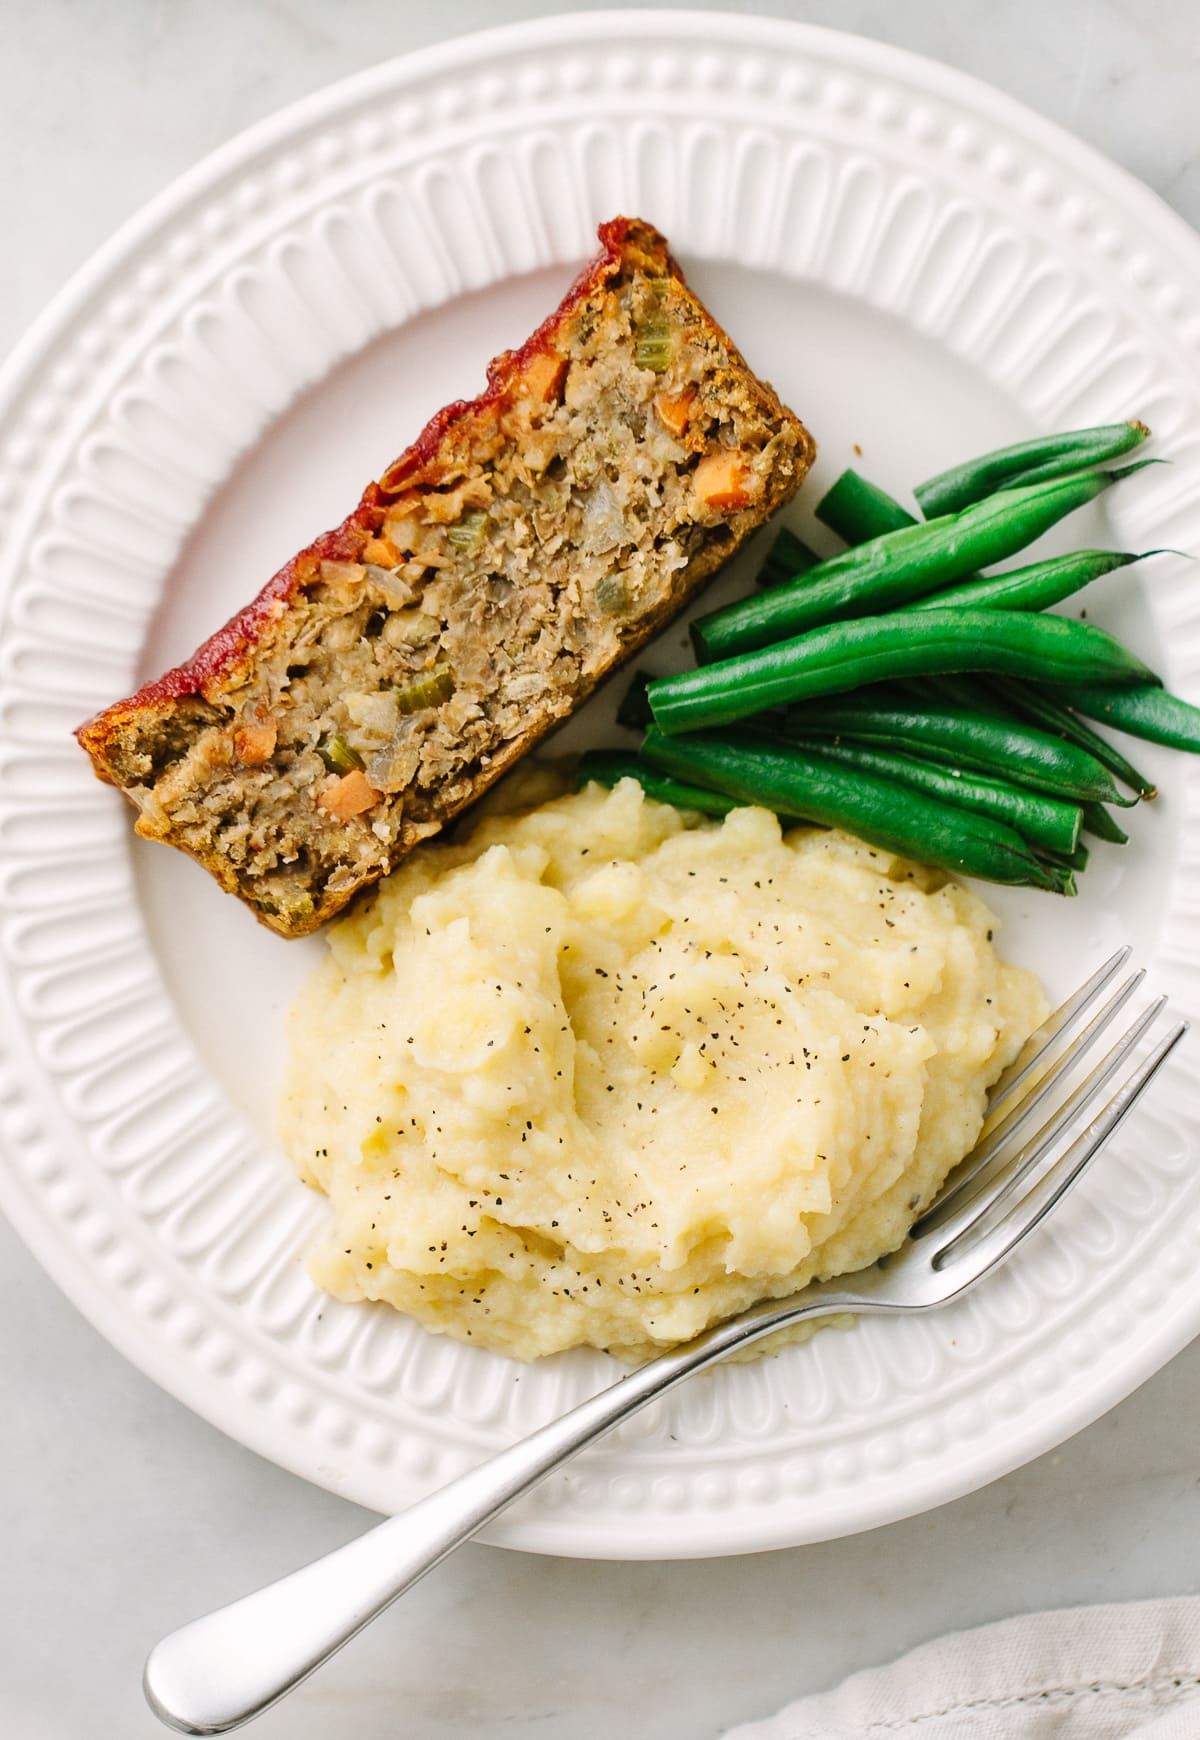 top down view of a serving of vegan lentil loaf with apple, sage and fennel on a white plate with items.